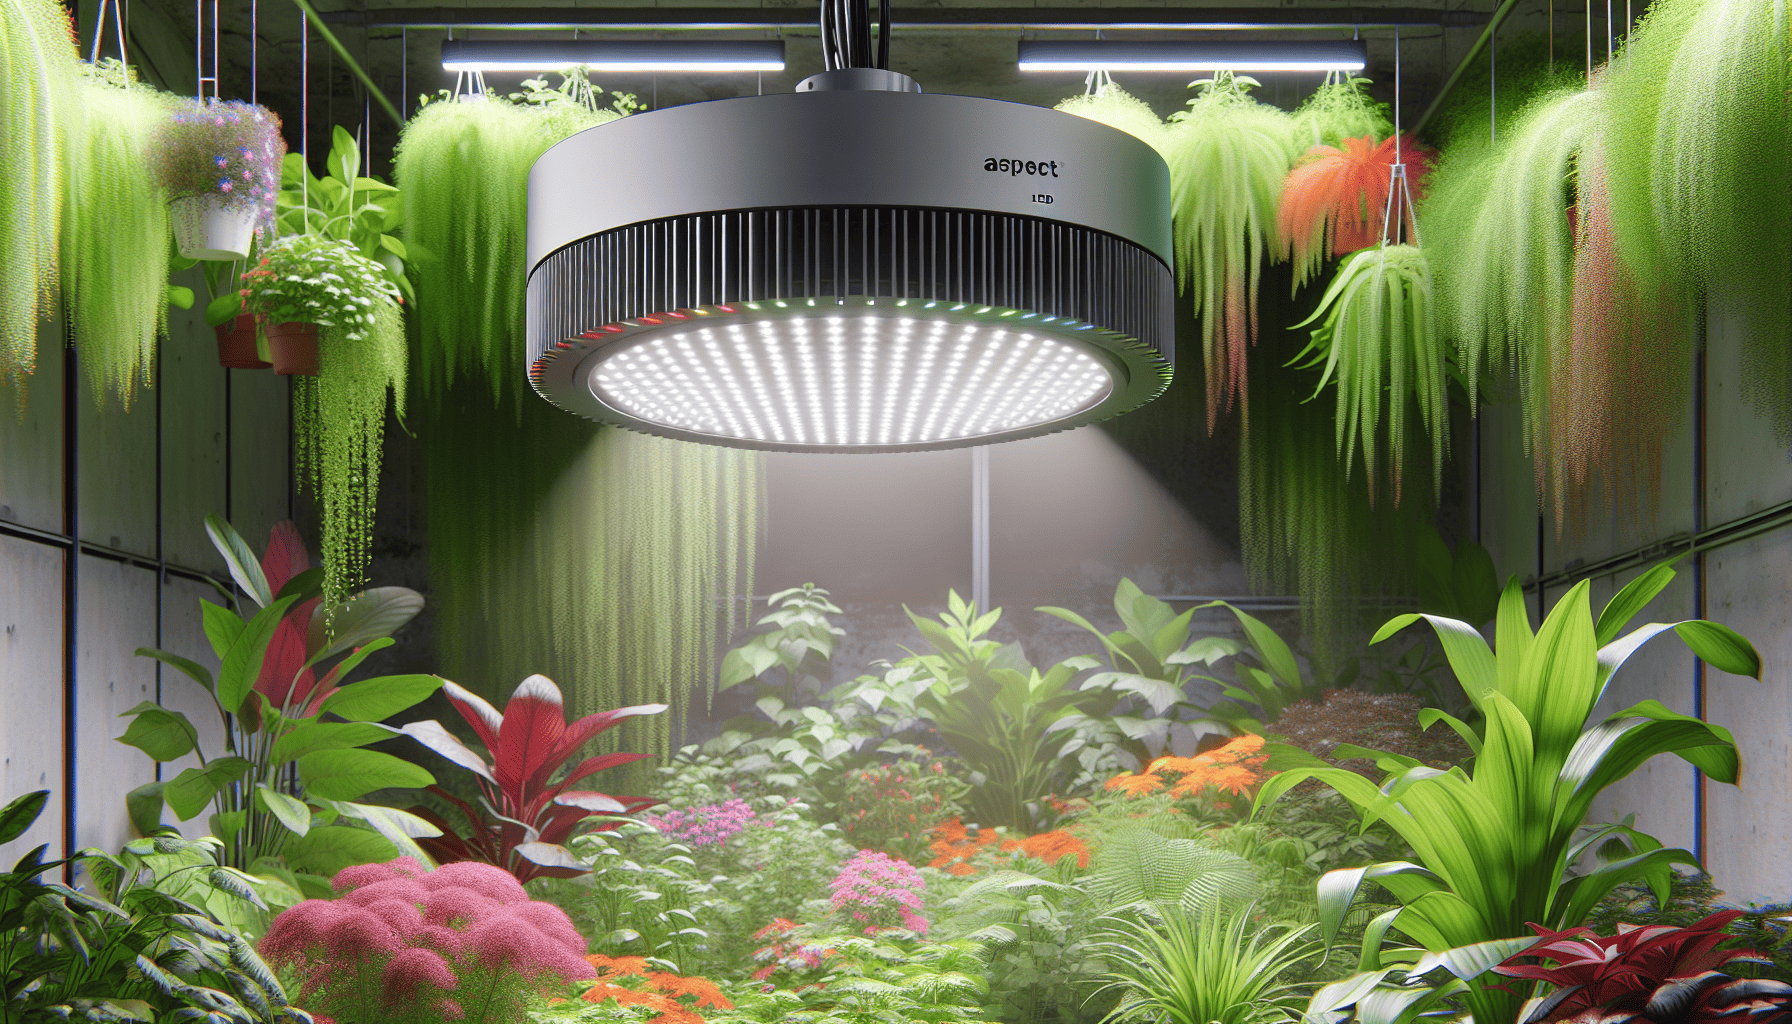 Aspect Hanging Grow Light promoting healthy plant growth with full spectrum LED light